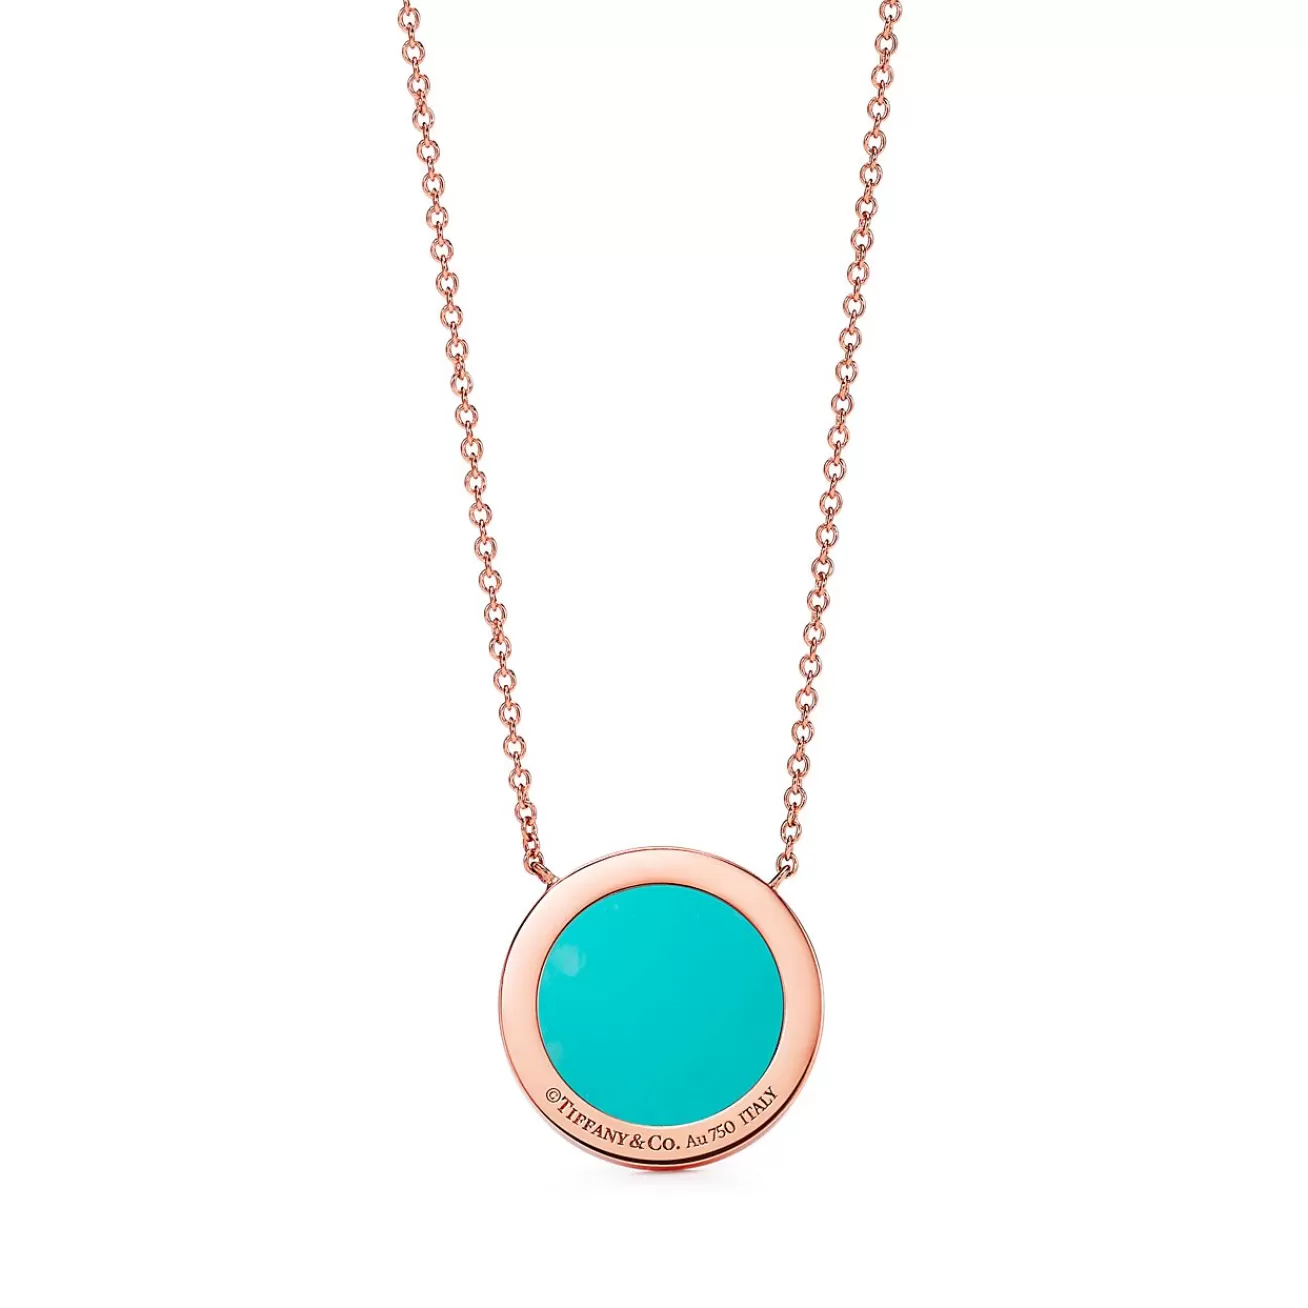 Tiffany & Co. Tiffany T diamond and turquoise circle pendant in 18k rose gold. | ^ Necklaces & Pendants | Rose Gold Jewelry